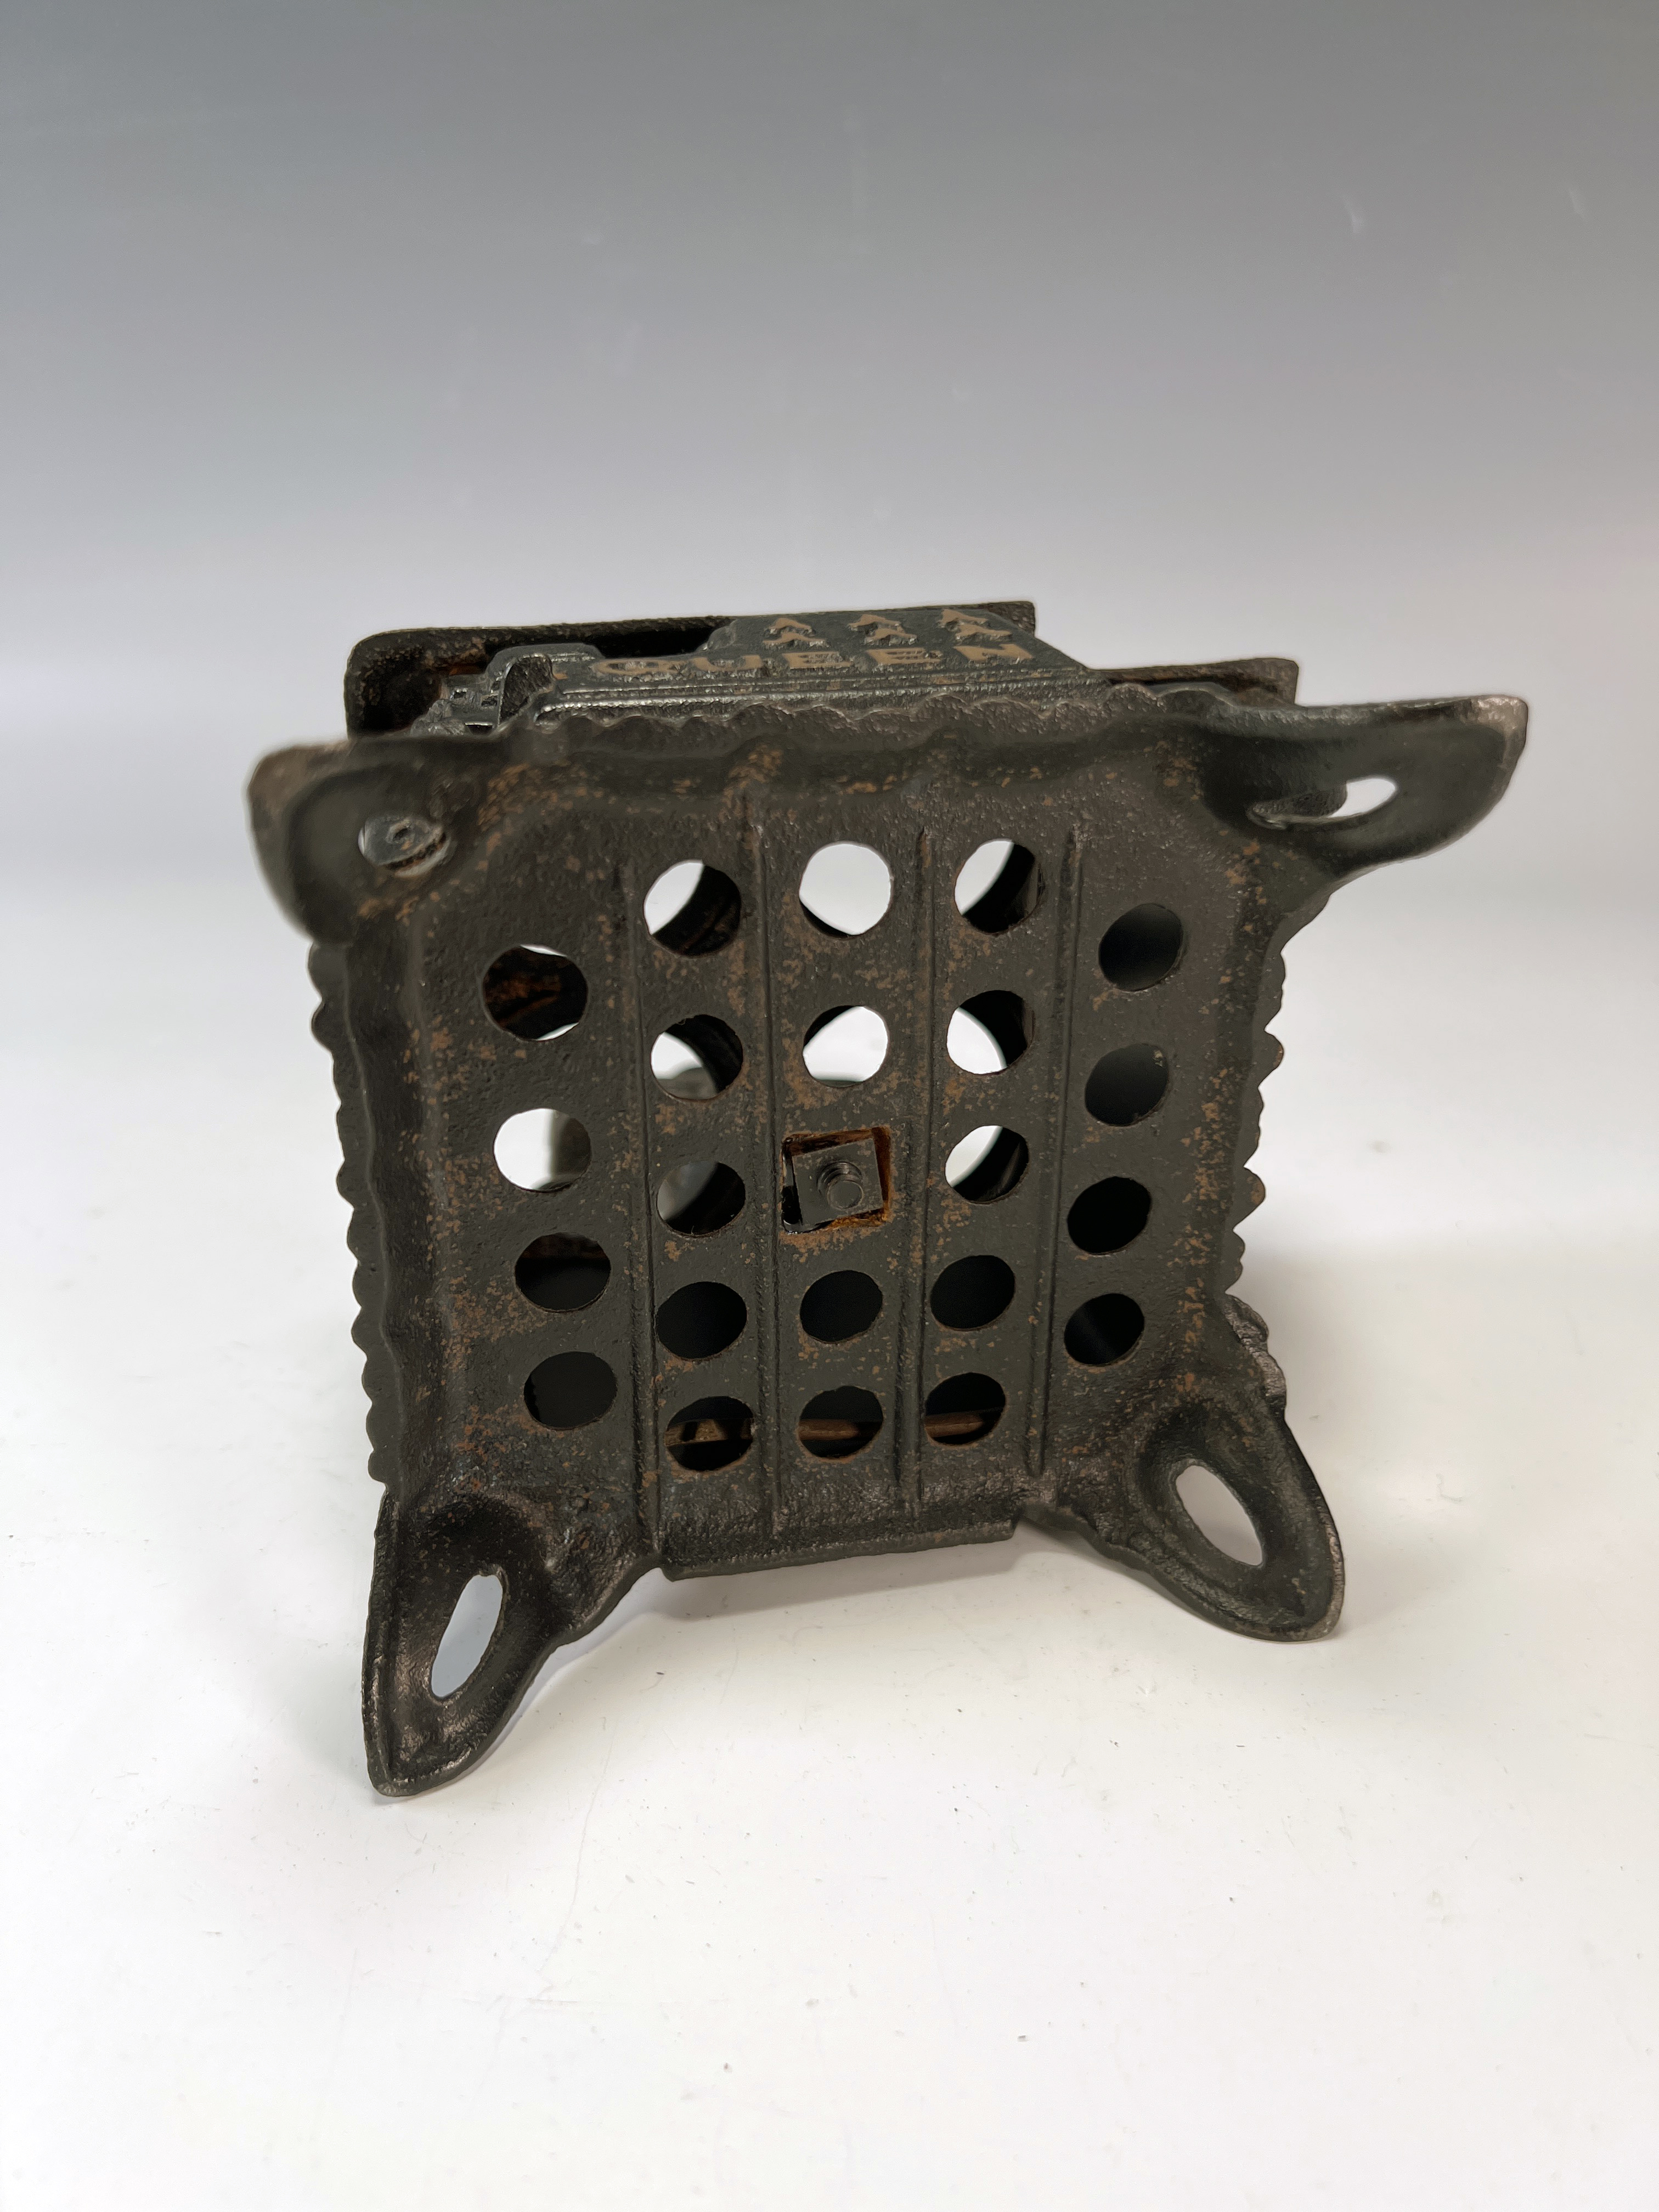 Sold at Auction: QUEEN MINIATURE CAST IRON STOVE W PANS